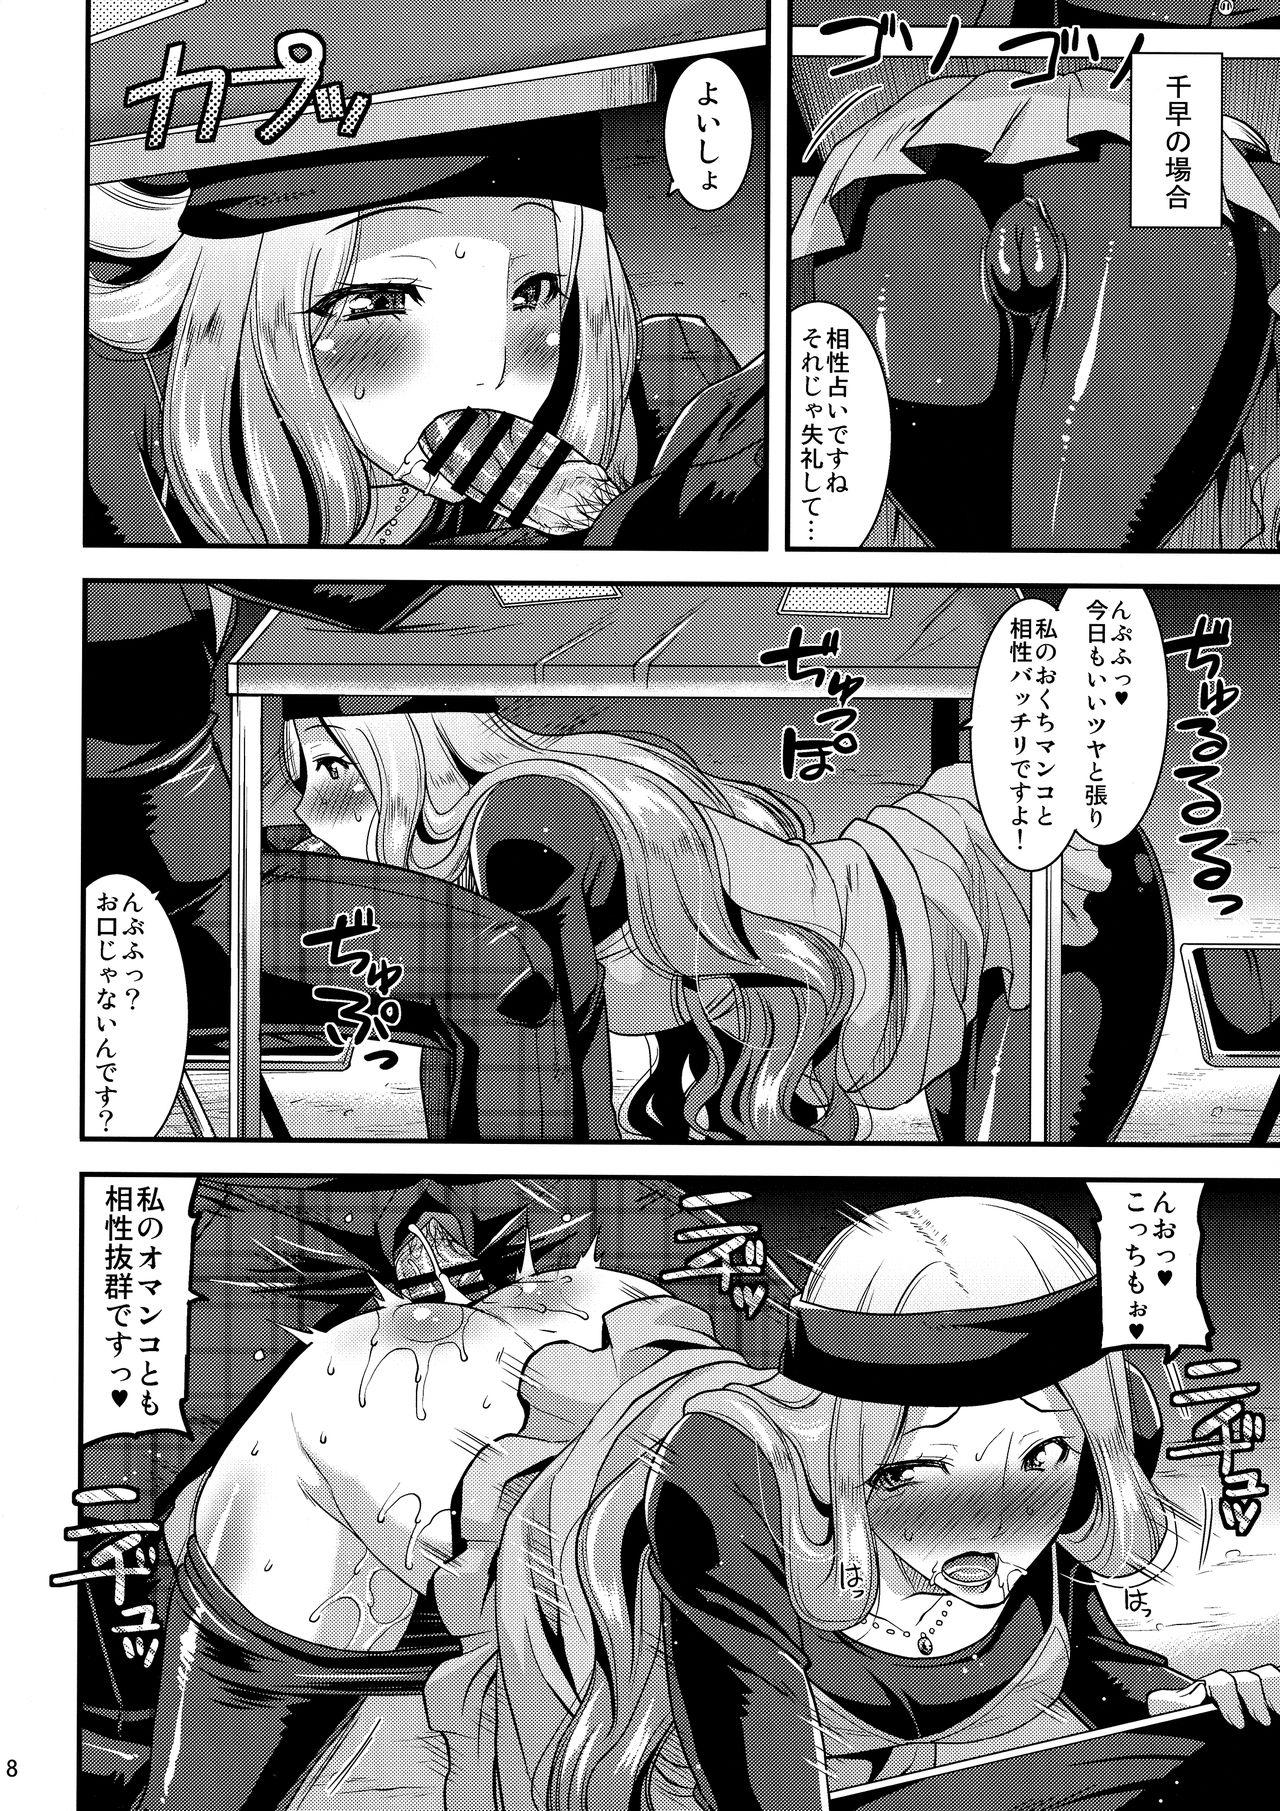 Anal Porn LET US START THE SEX - Persona 5 Footfetish - Page 7